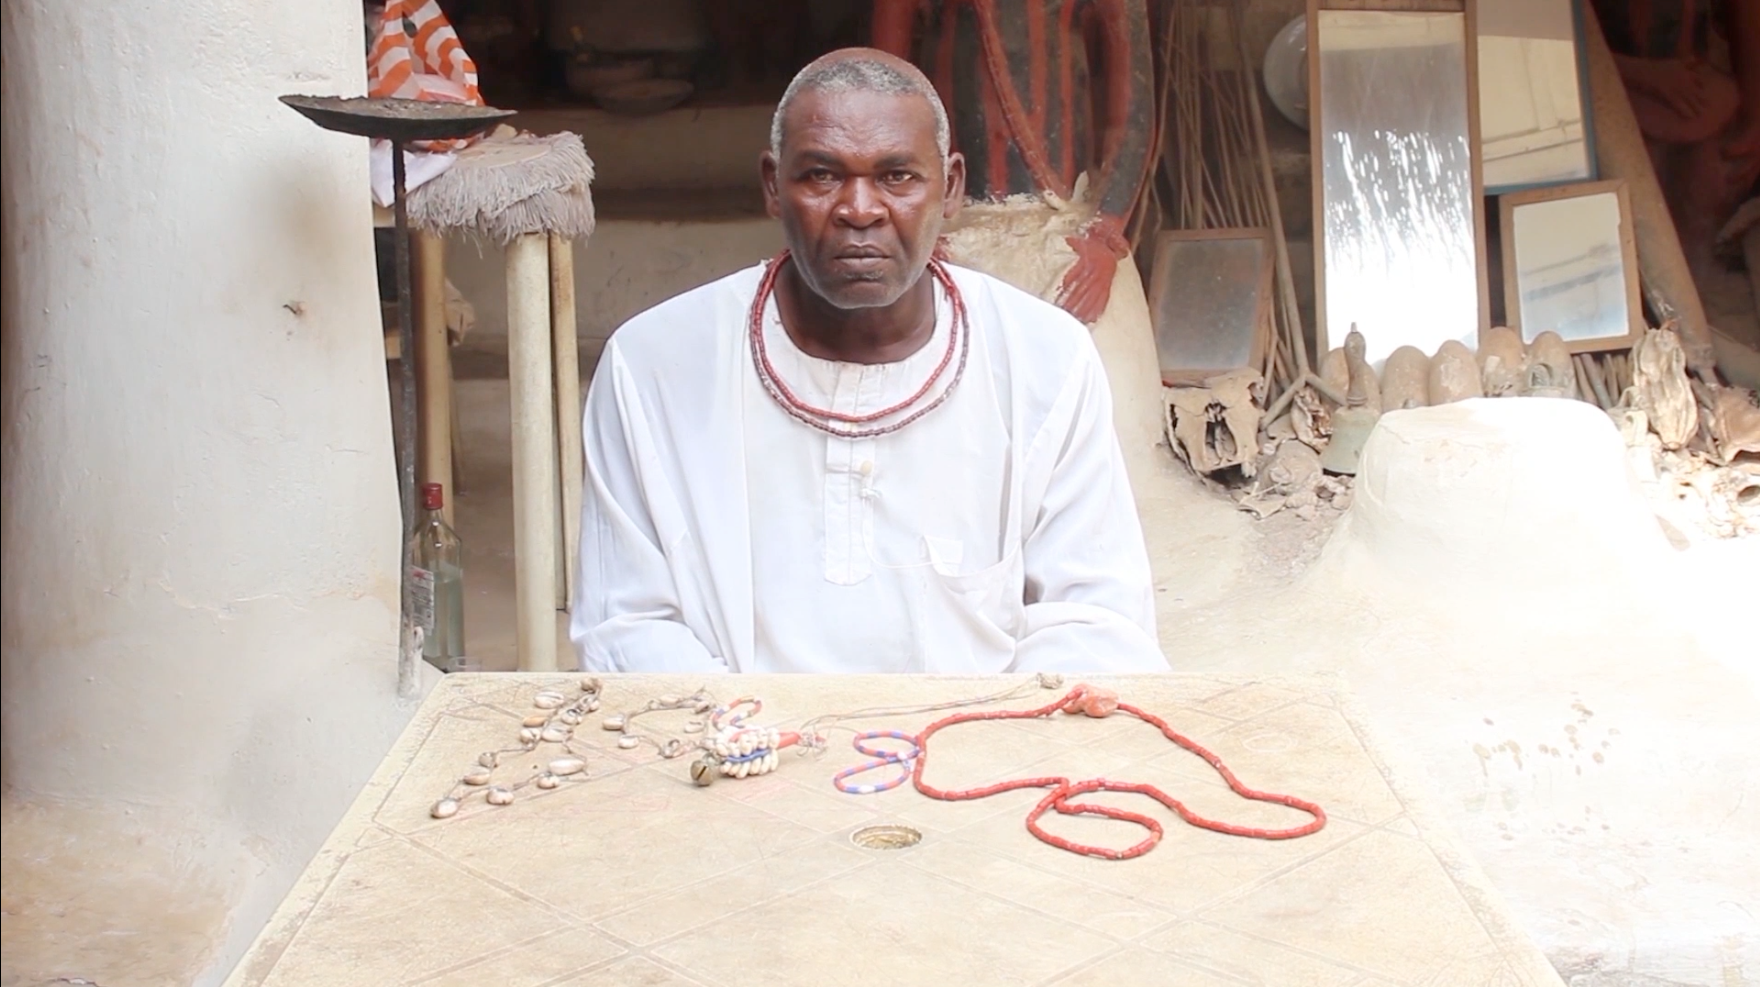 Olokun priest showing different types of beads